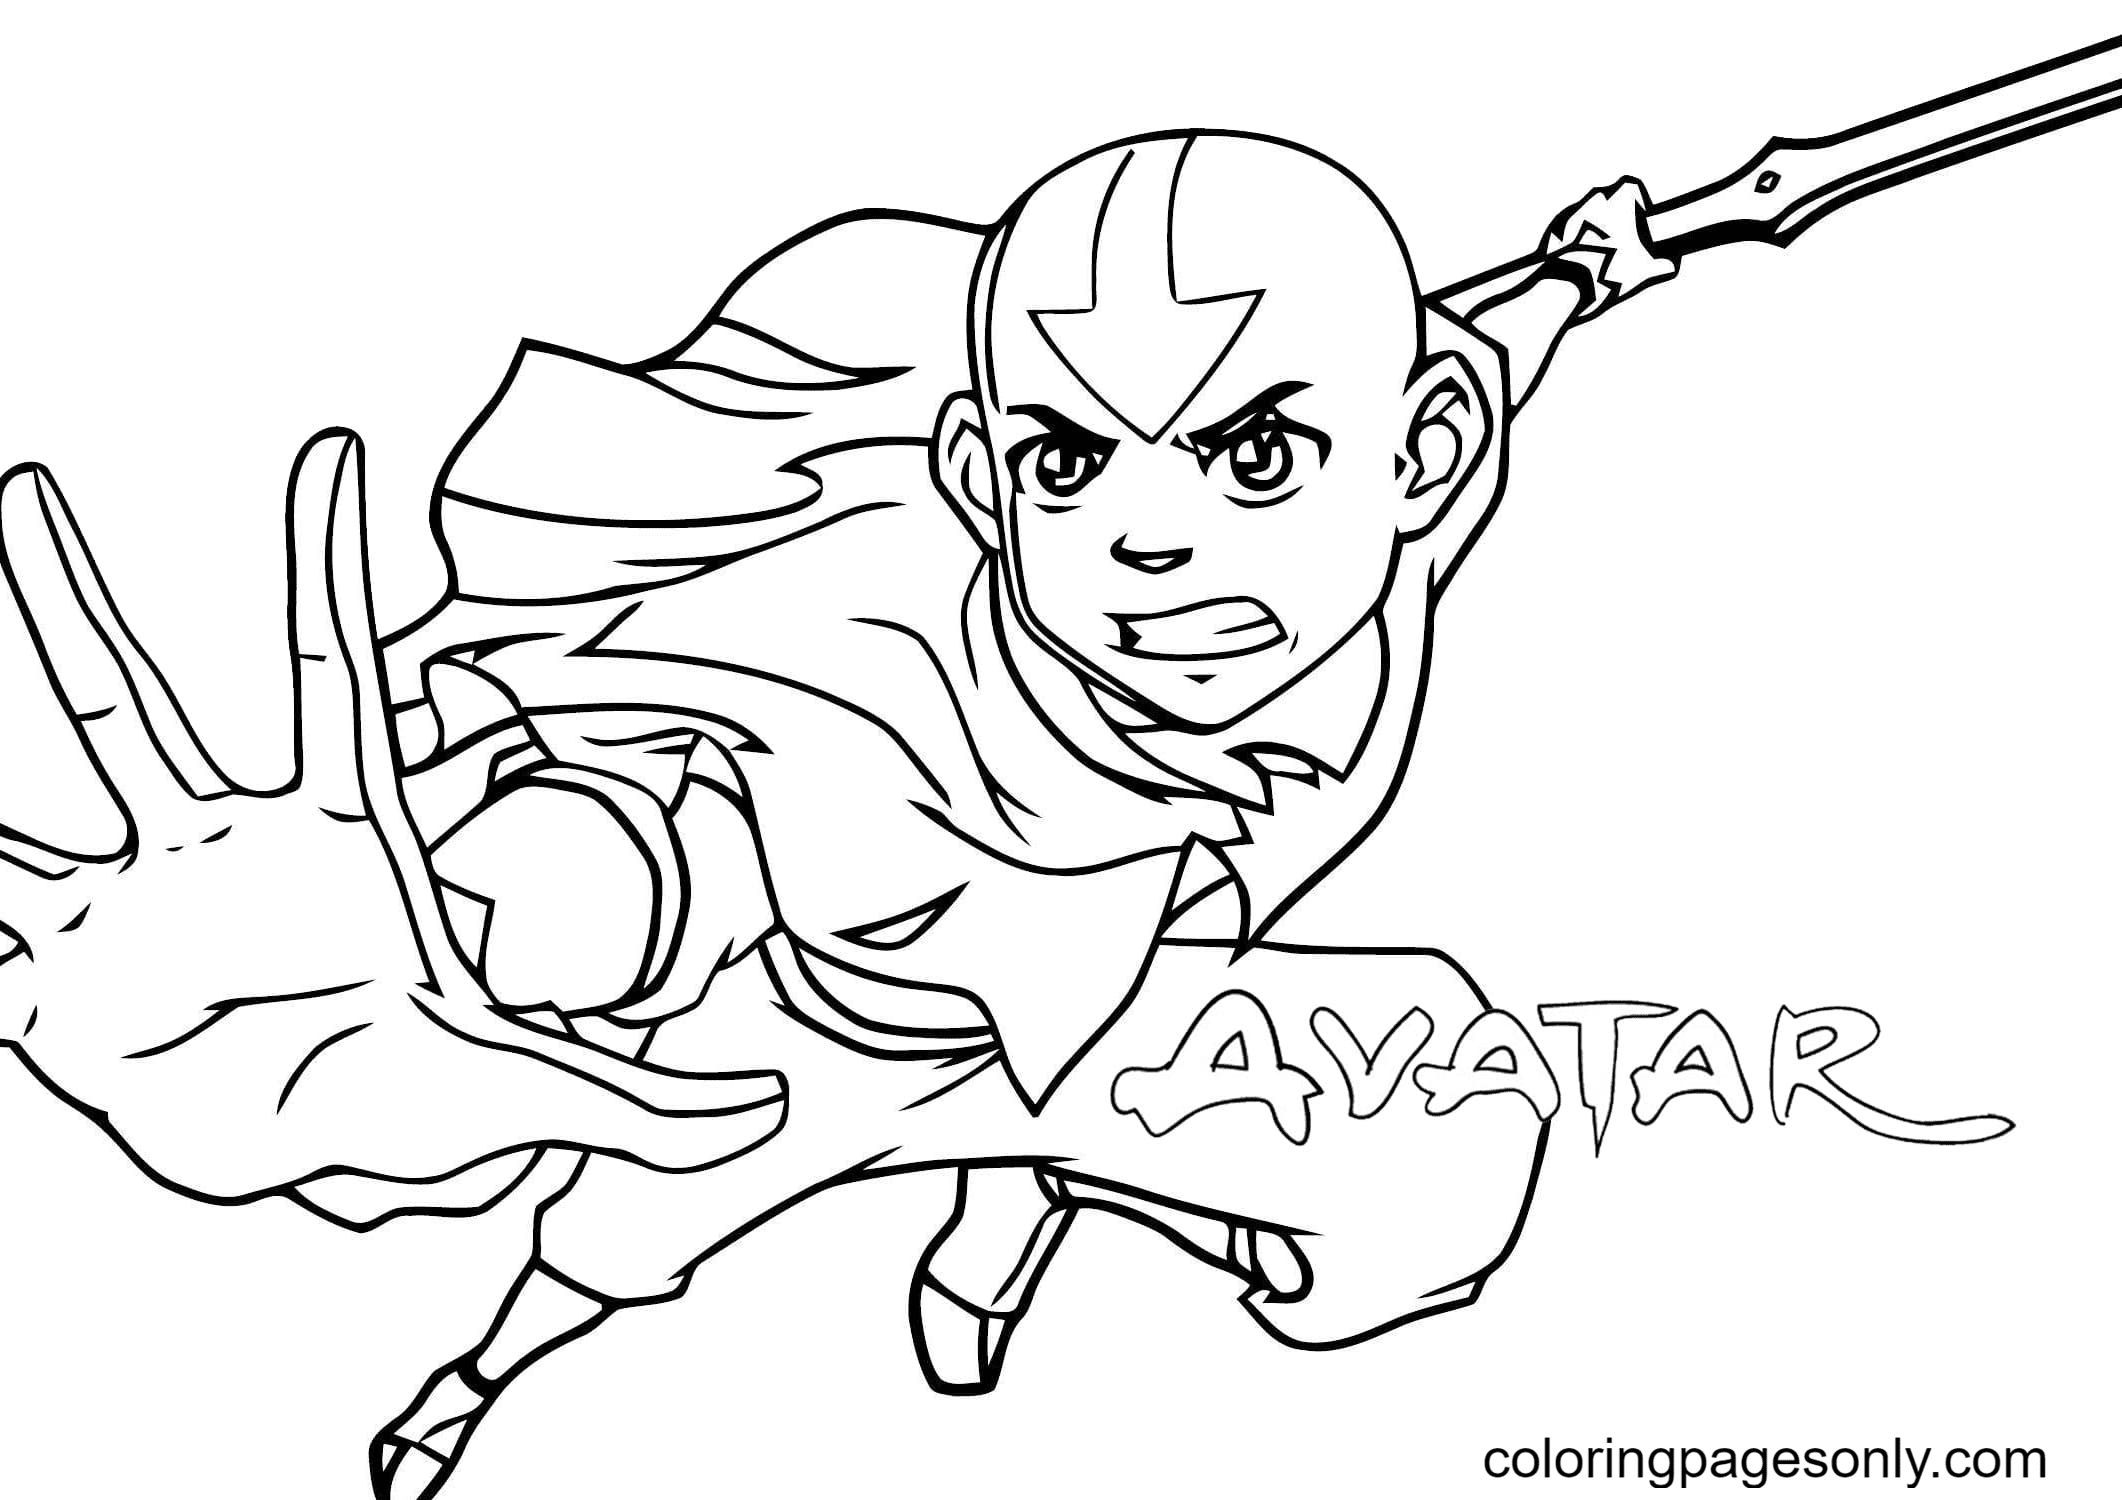 Boy Aang, ruler of all elements Coloring Pages